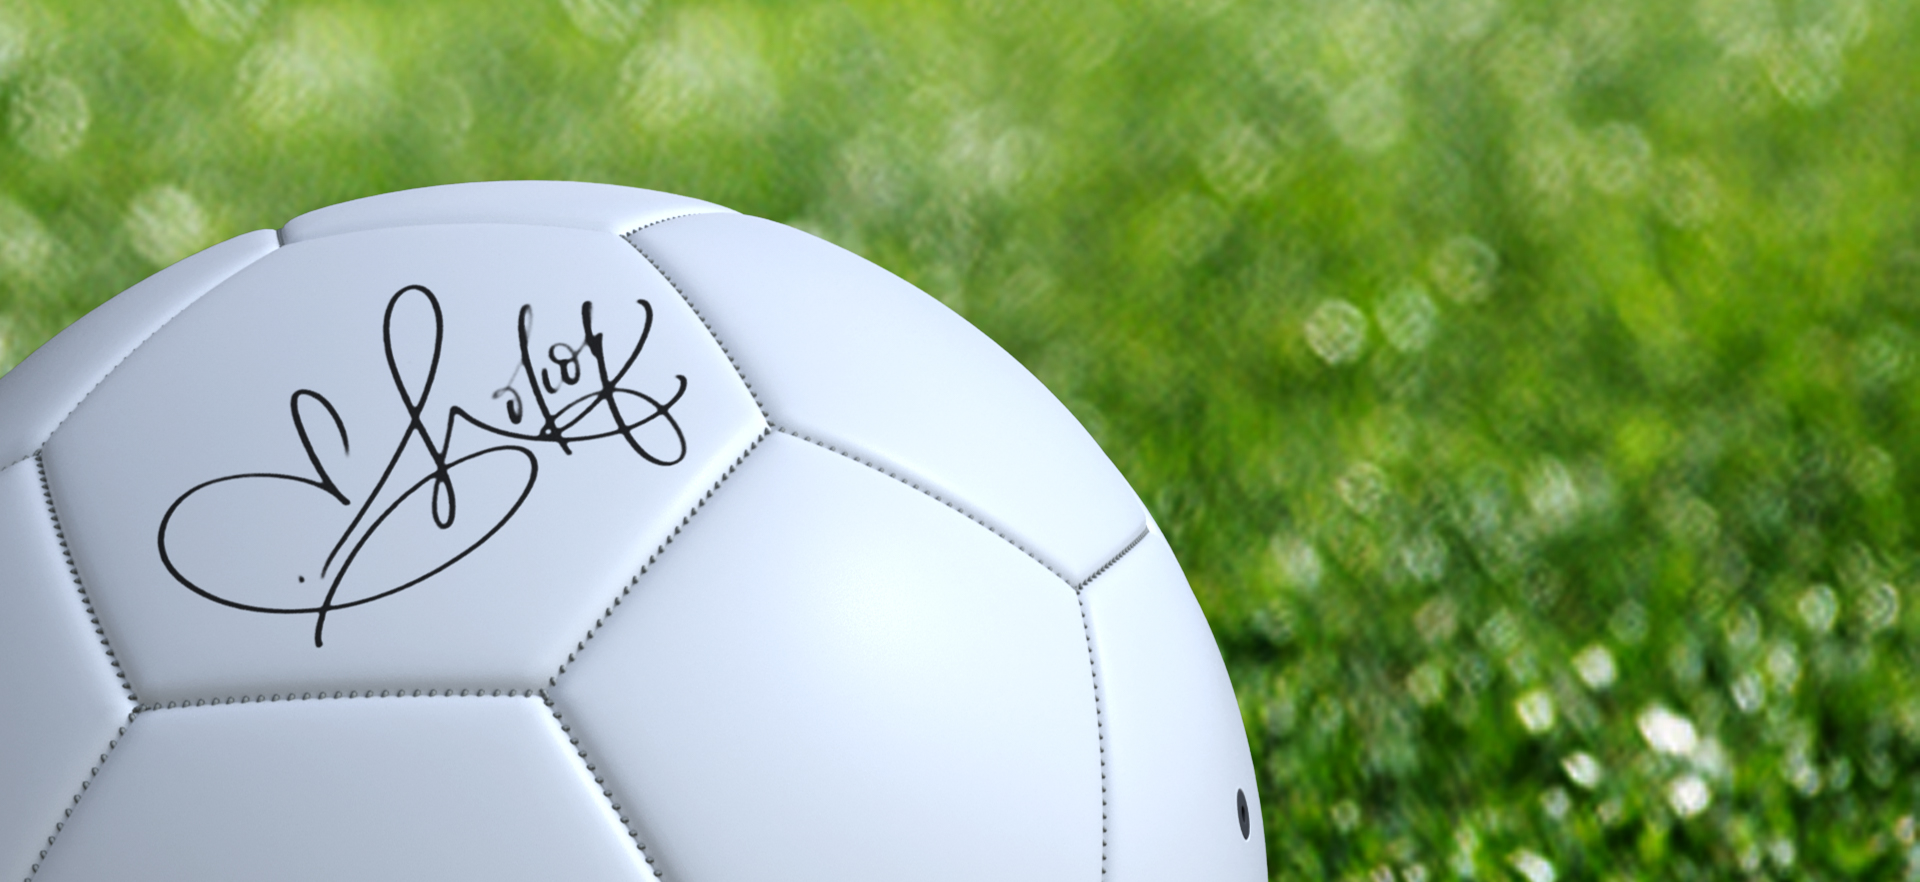 Signed football on grass